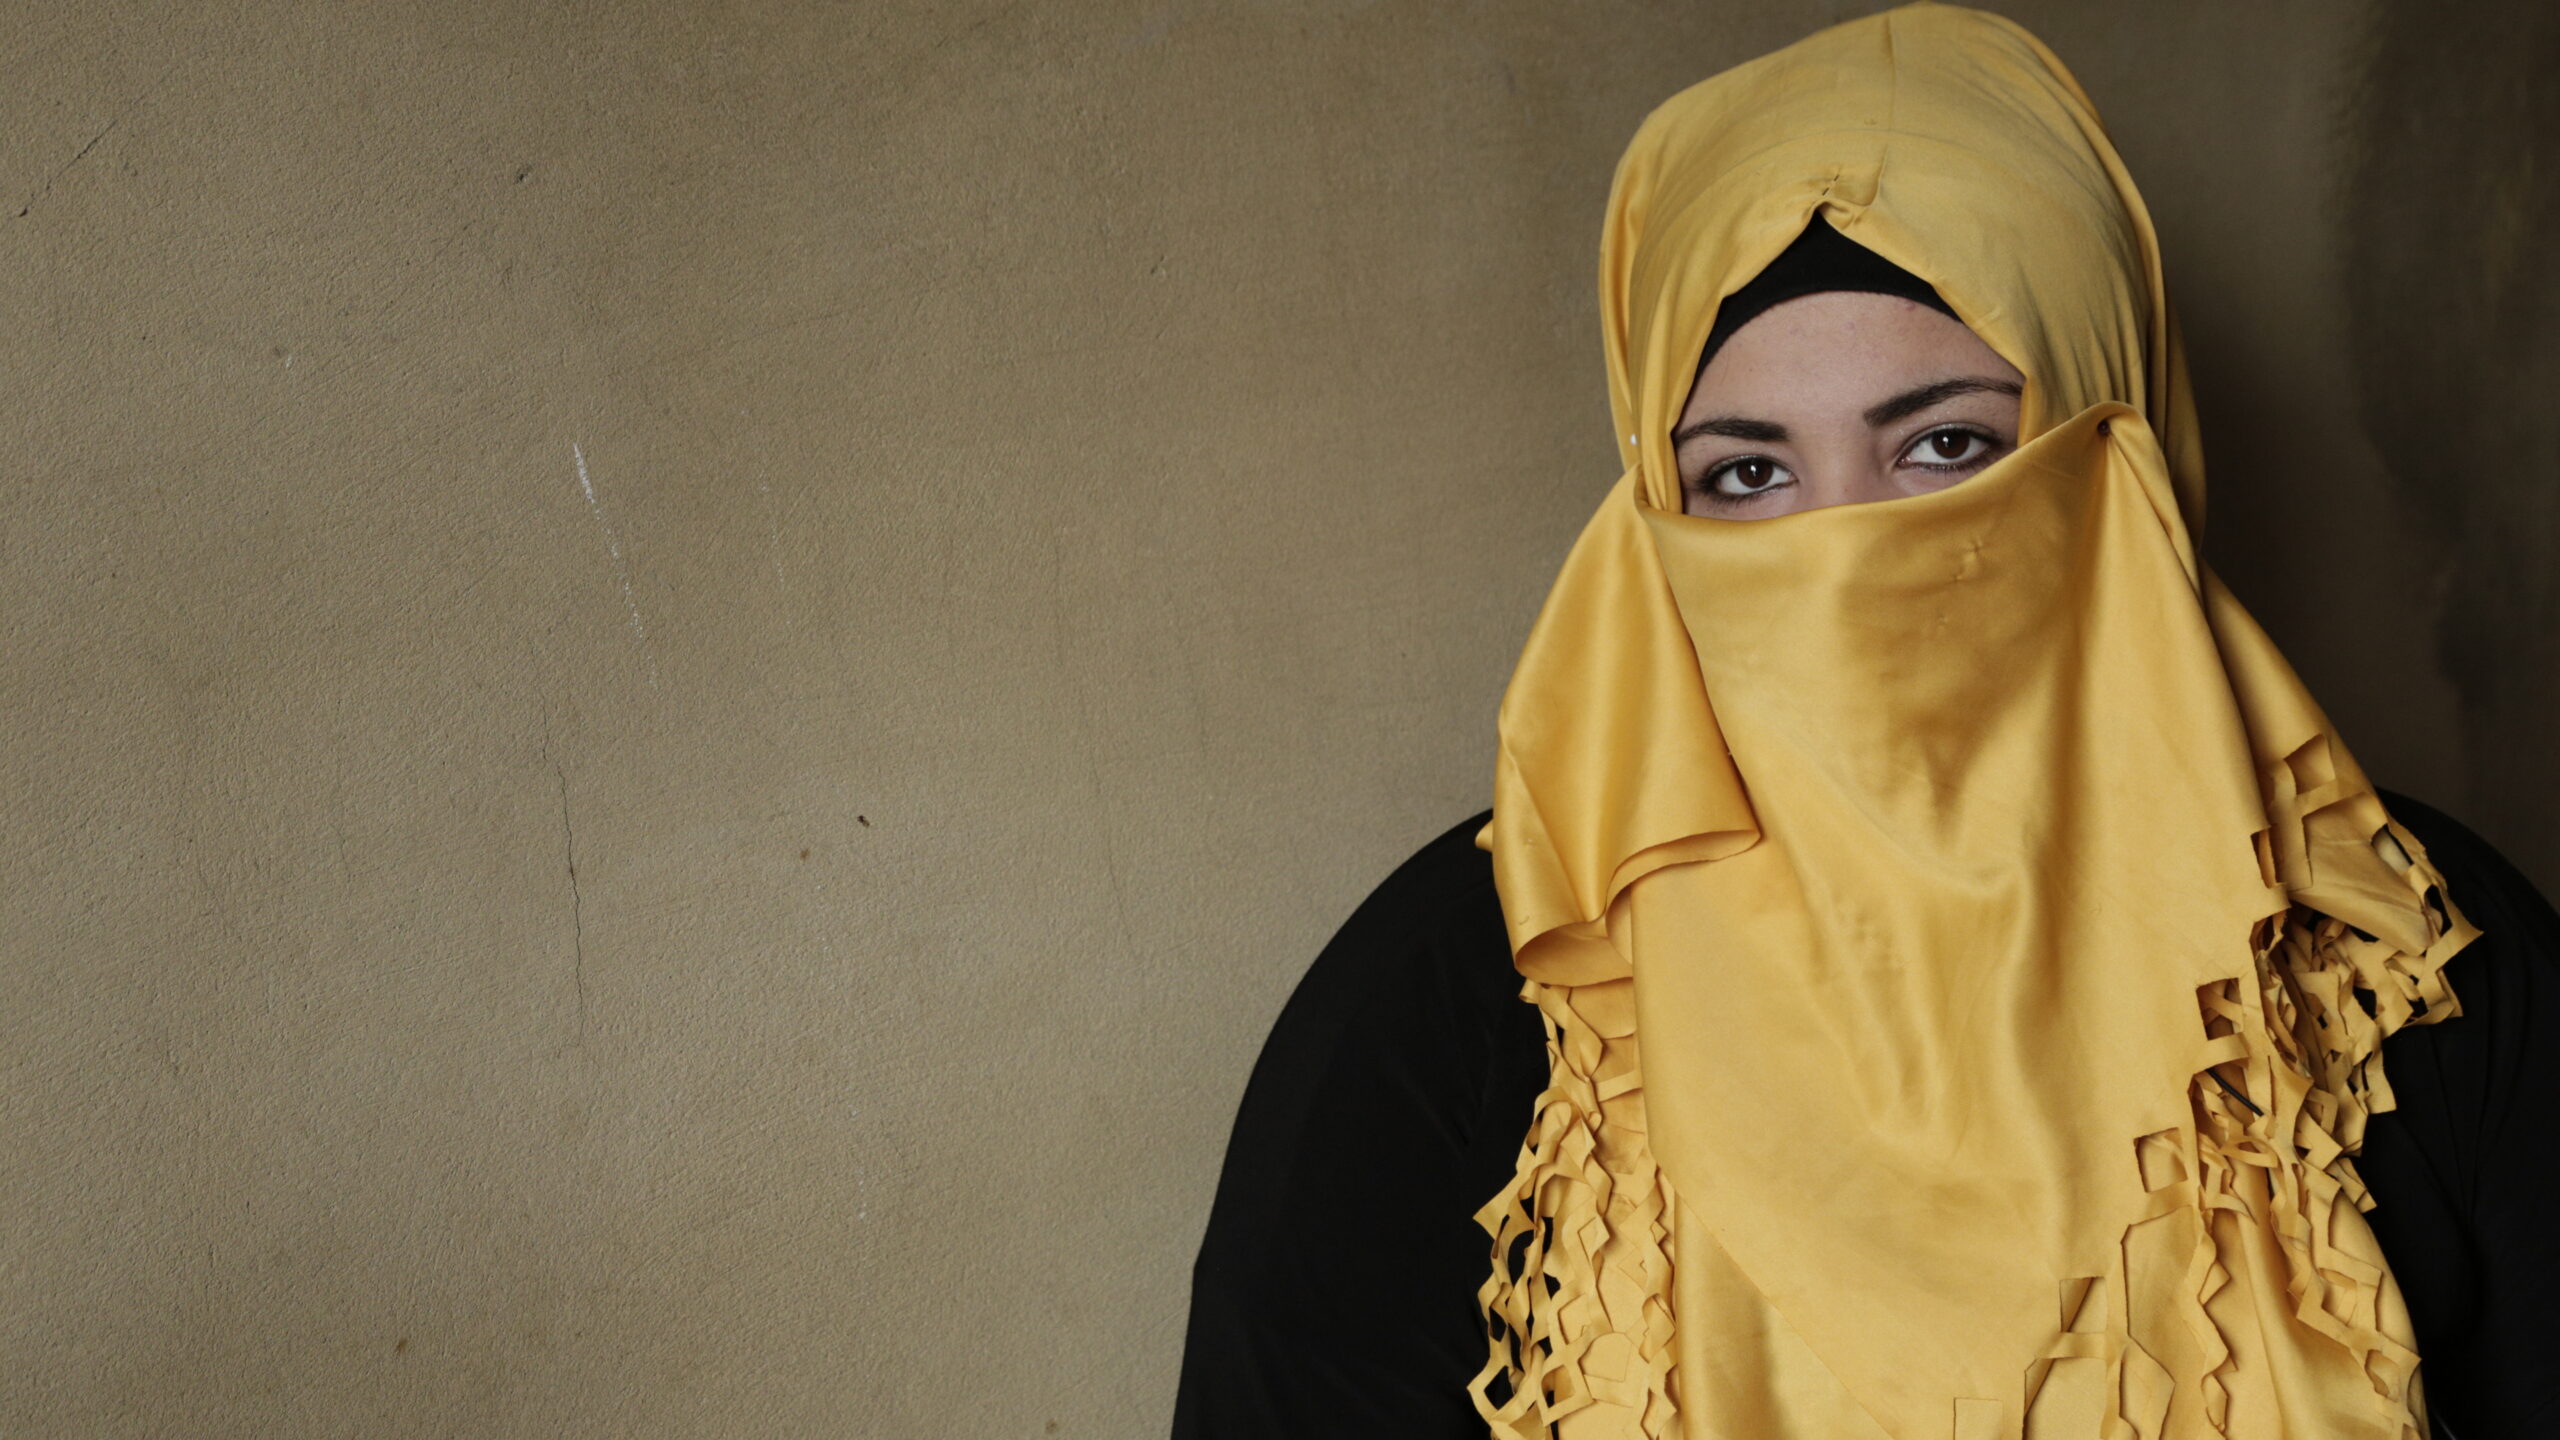 A girl in a yellow niqab looks at the camera.